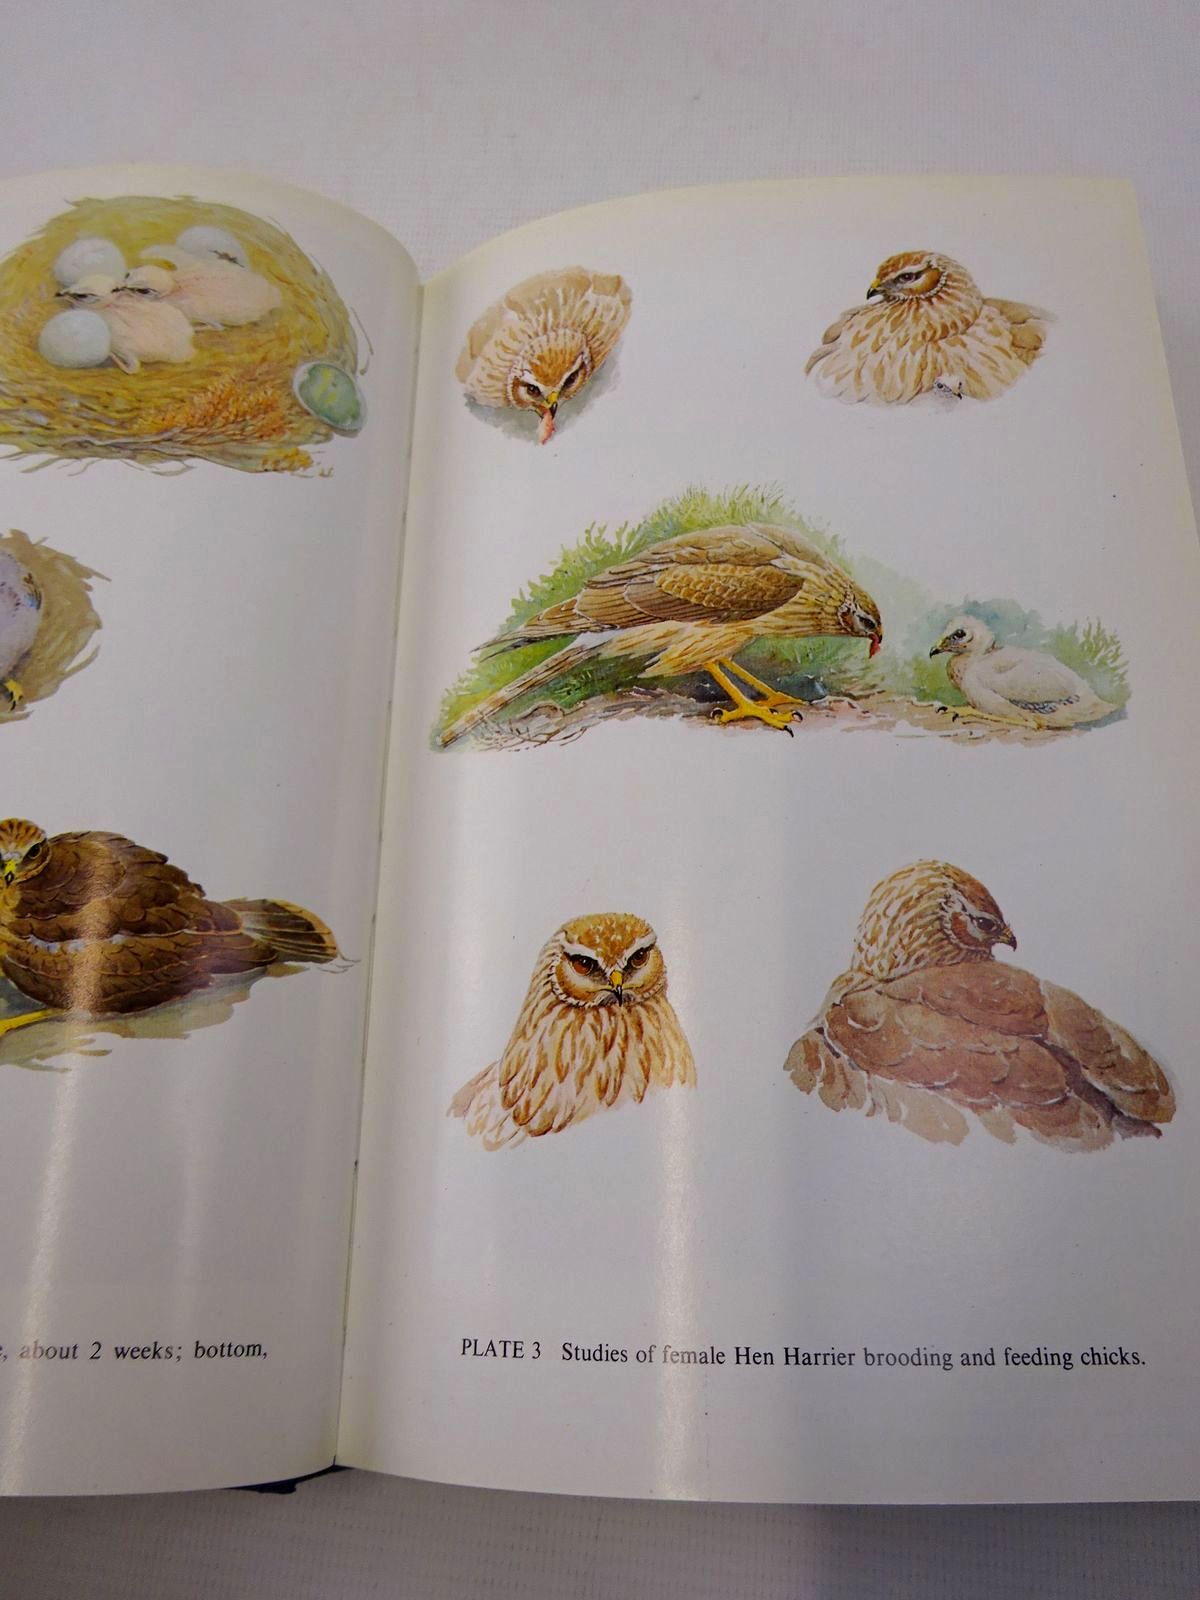 Photo of THE HEN HARRIER written by Watson, Donald illustrated by Watson, Donald published by T. & A.D. Poyser (STOCK CODE: 1815871)  for sale by Stella & Rose's Books